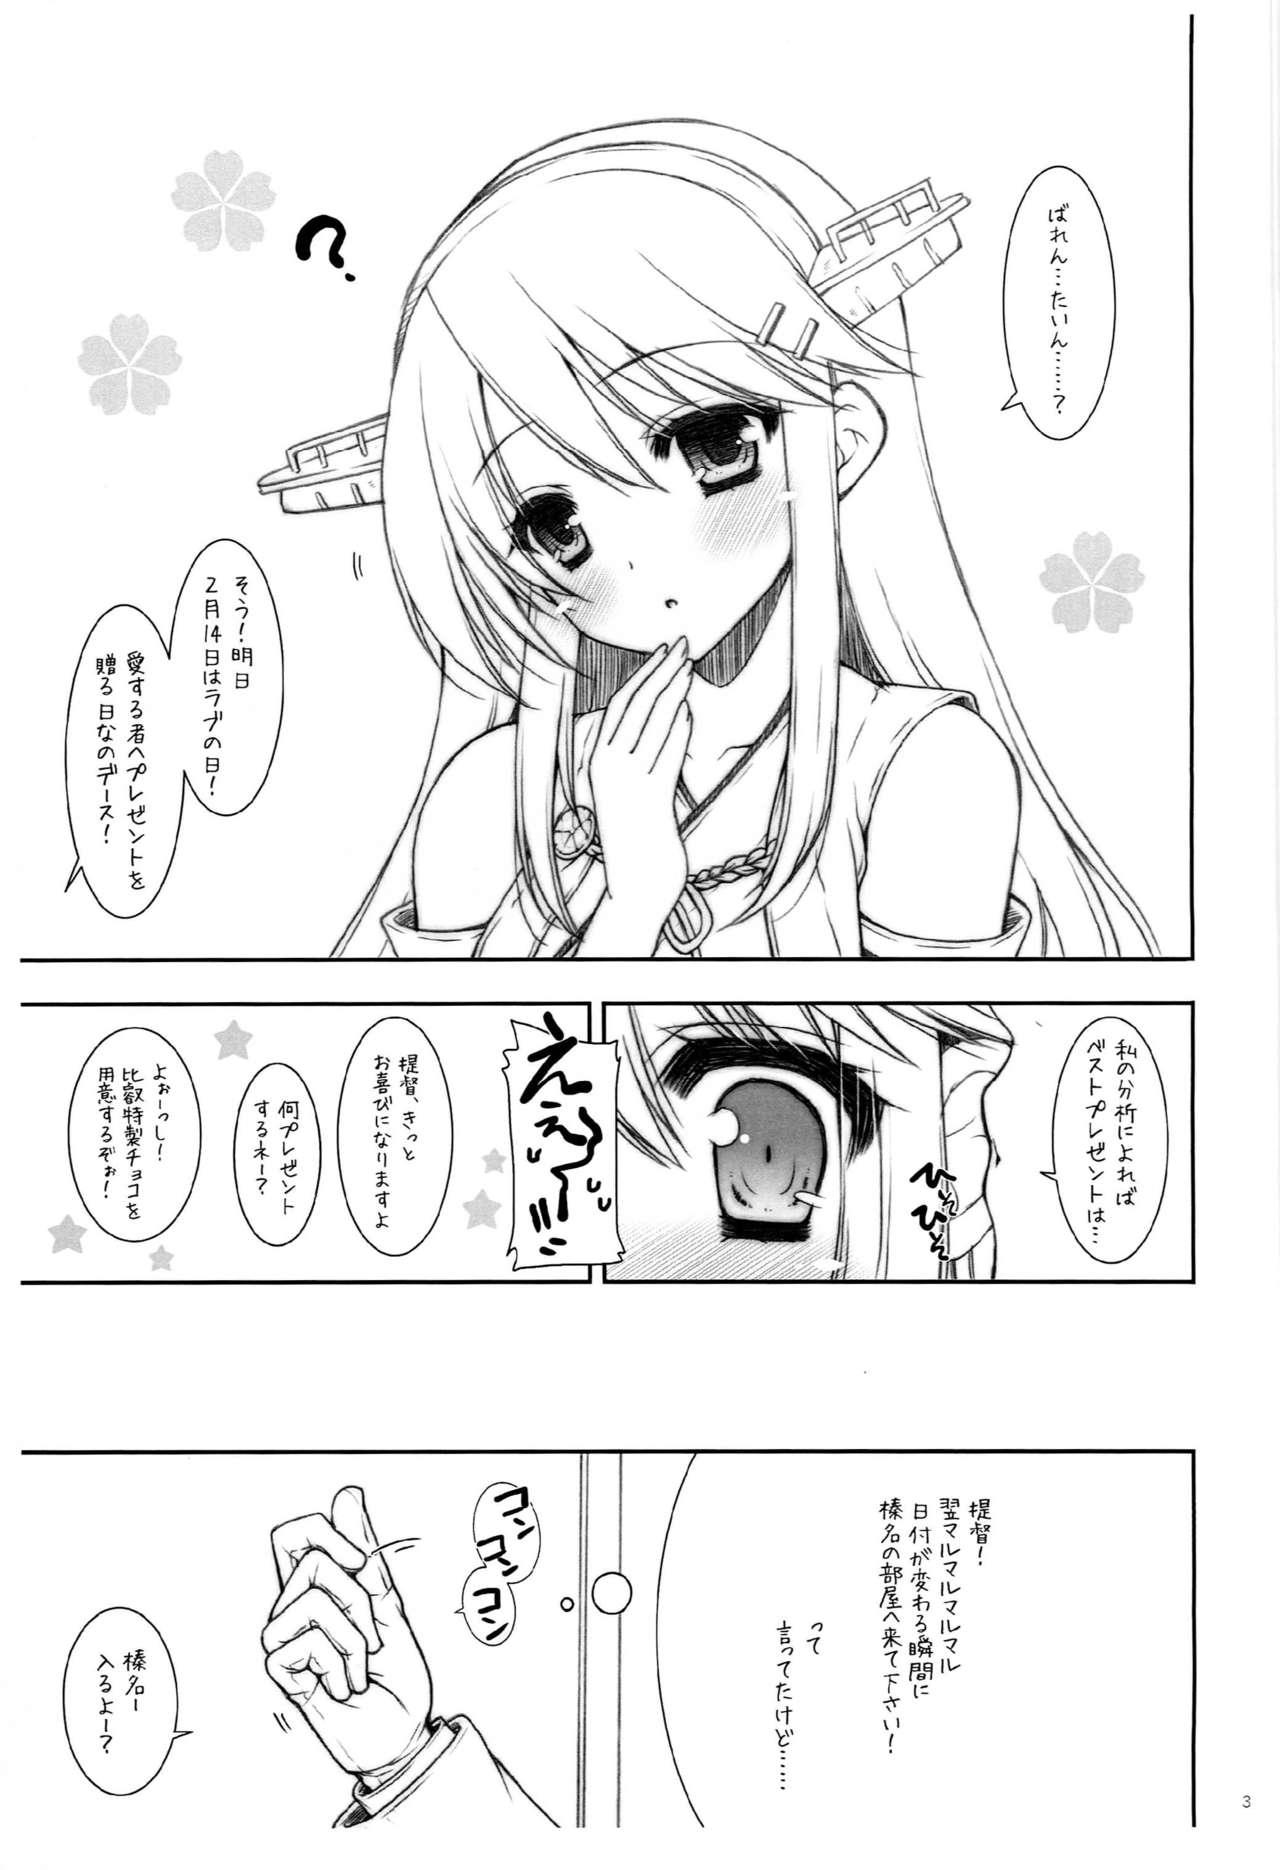 Edging ShiguColle 58 - Kantai collection Step Dad - Page 3